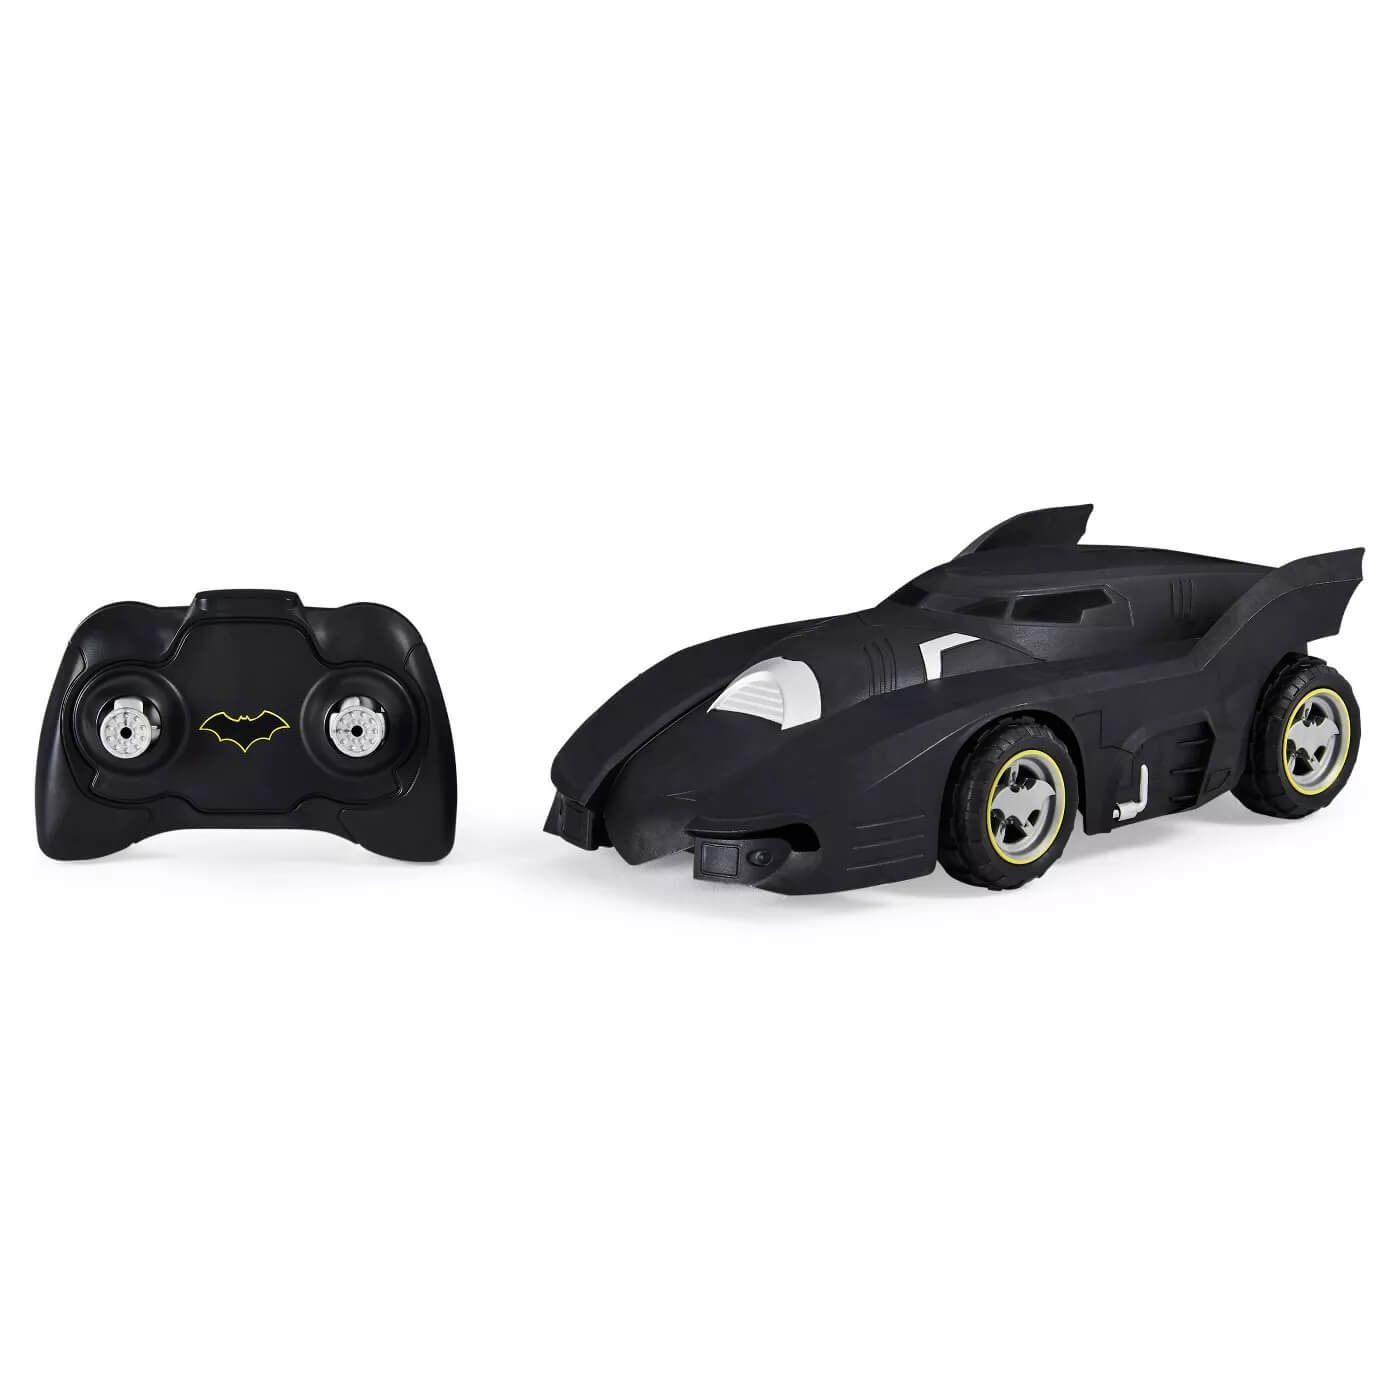 DC Batmobile Full Function 1:20 Scale RC Vehicle